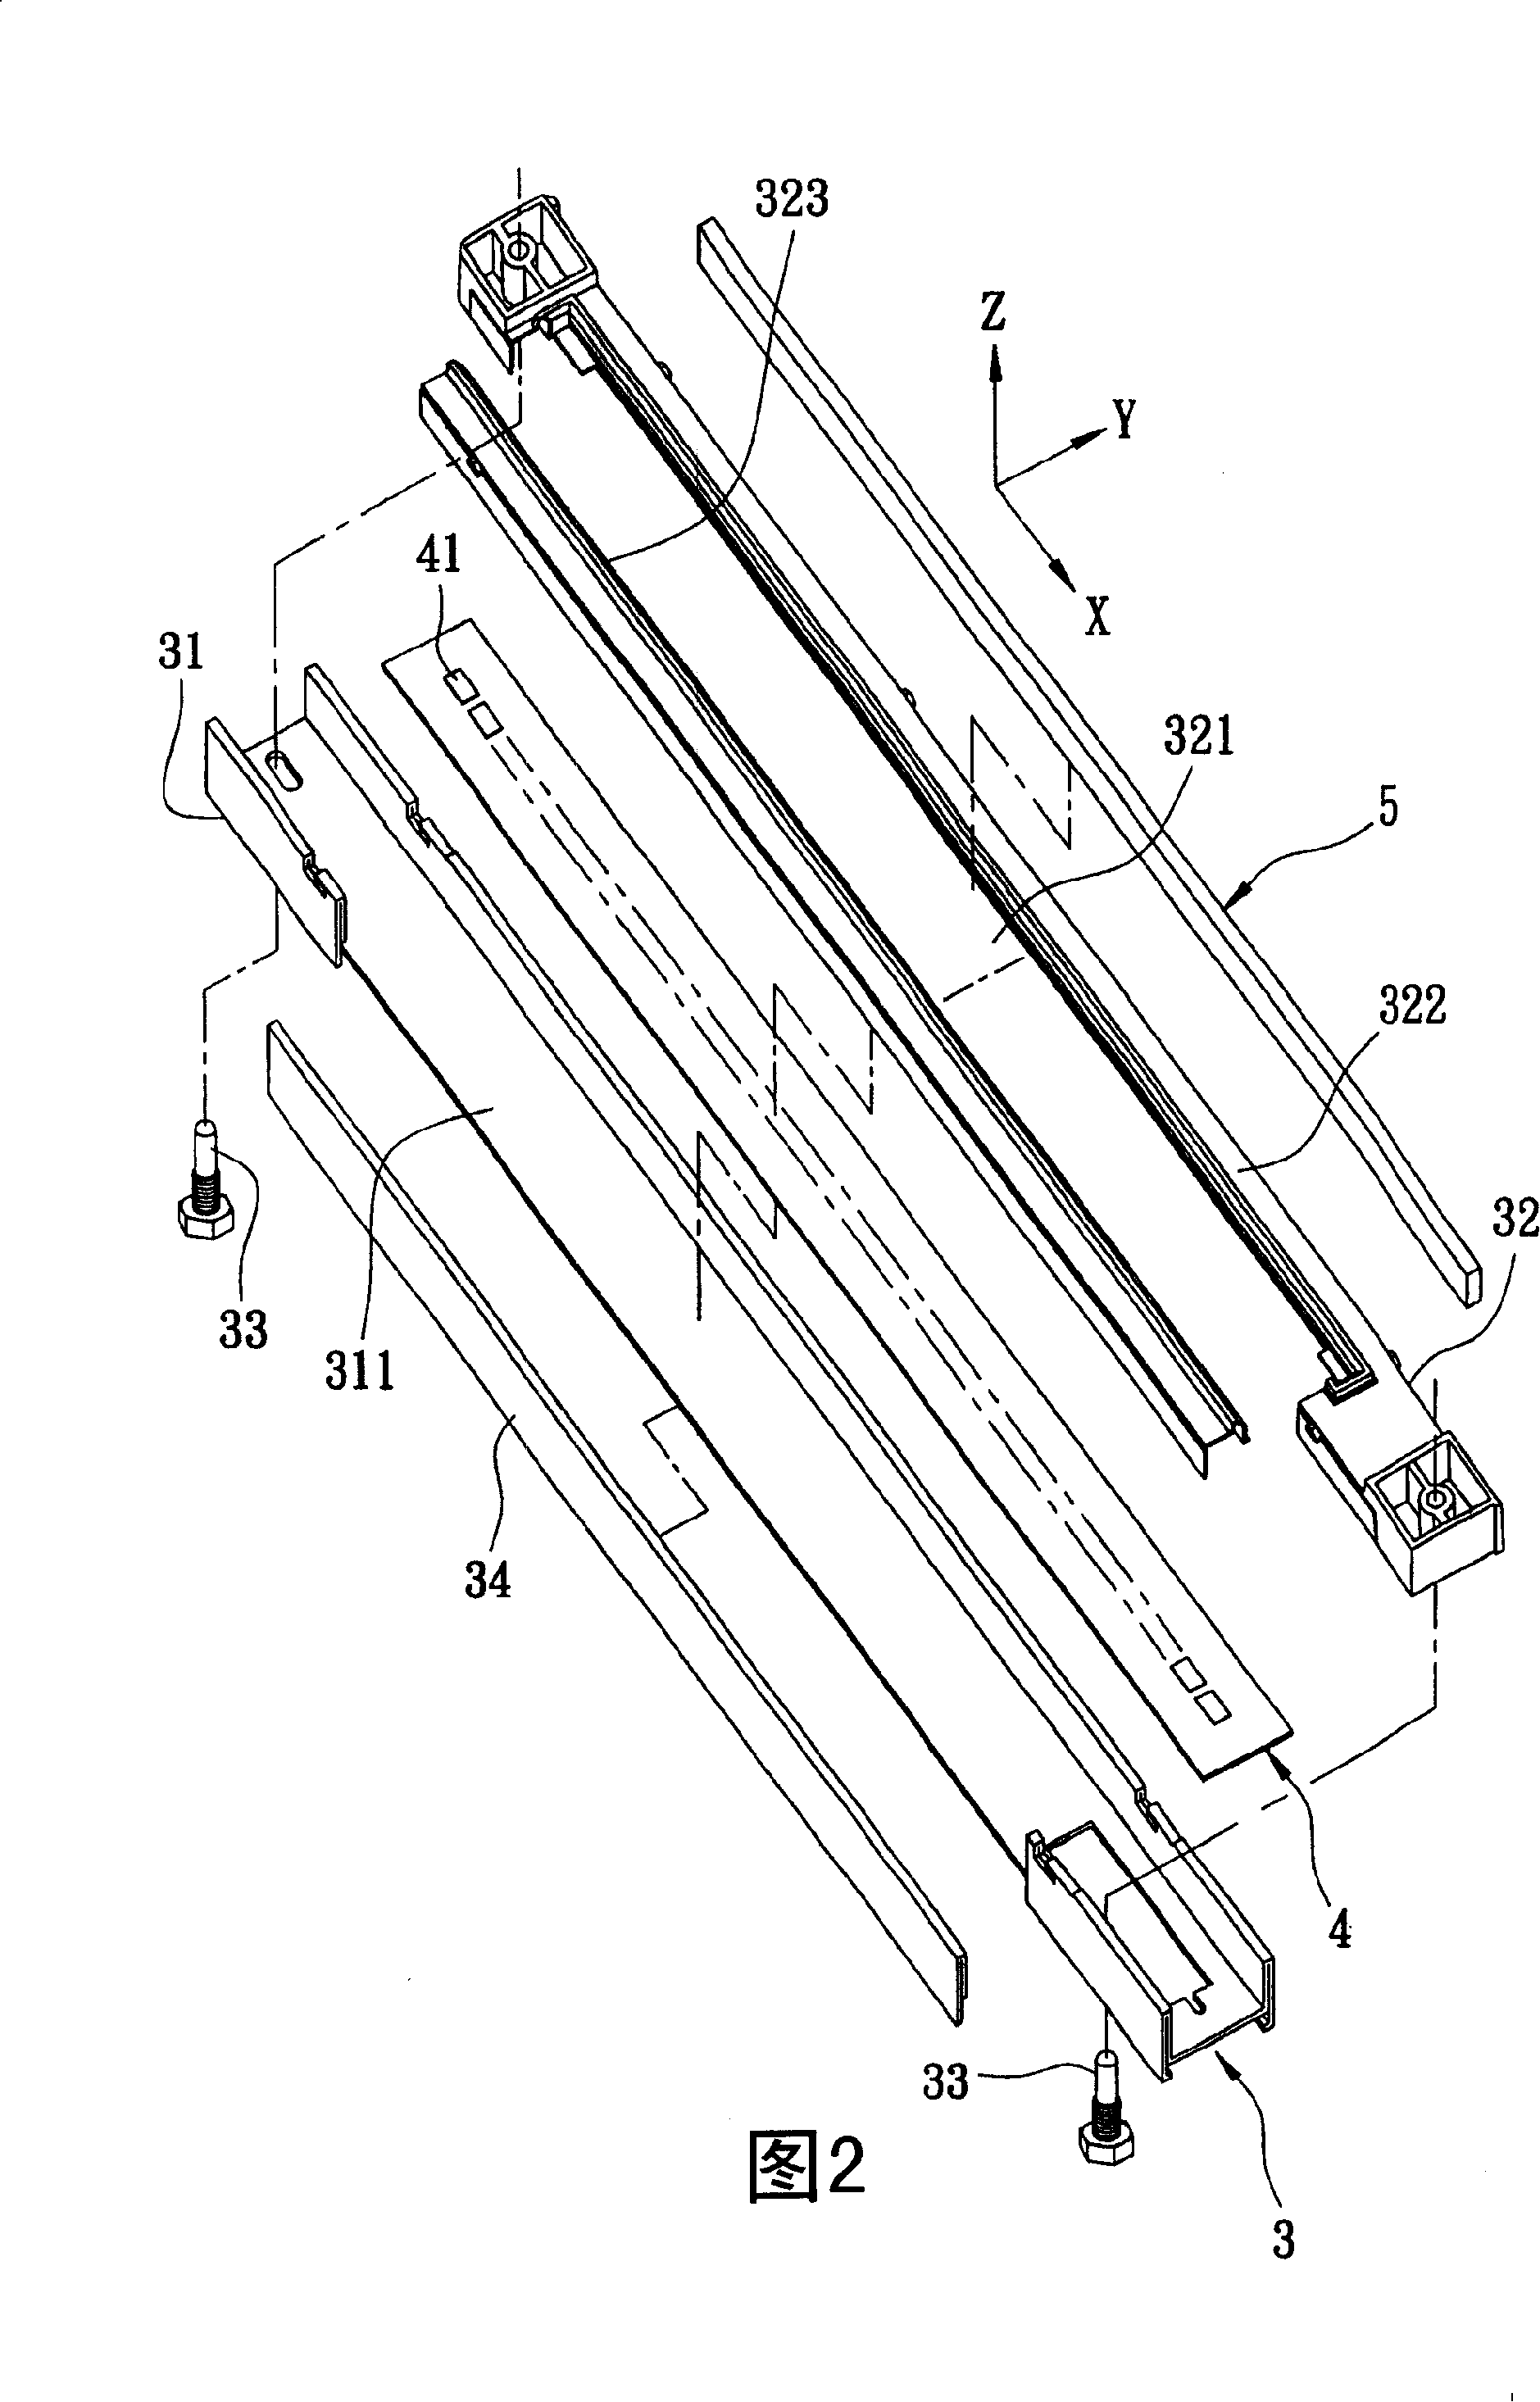 Optical module and its alignment and assembly method